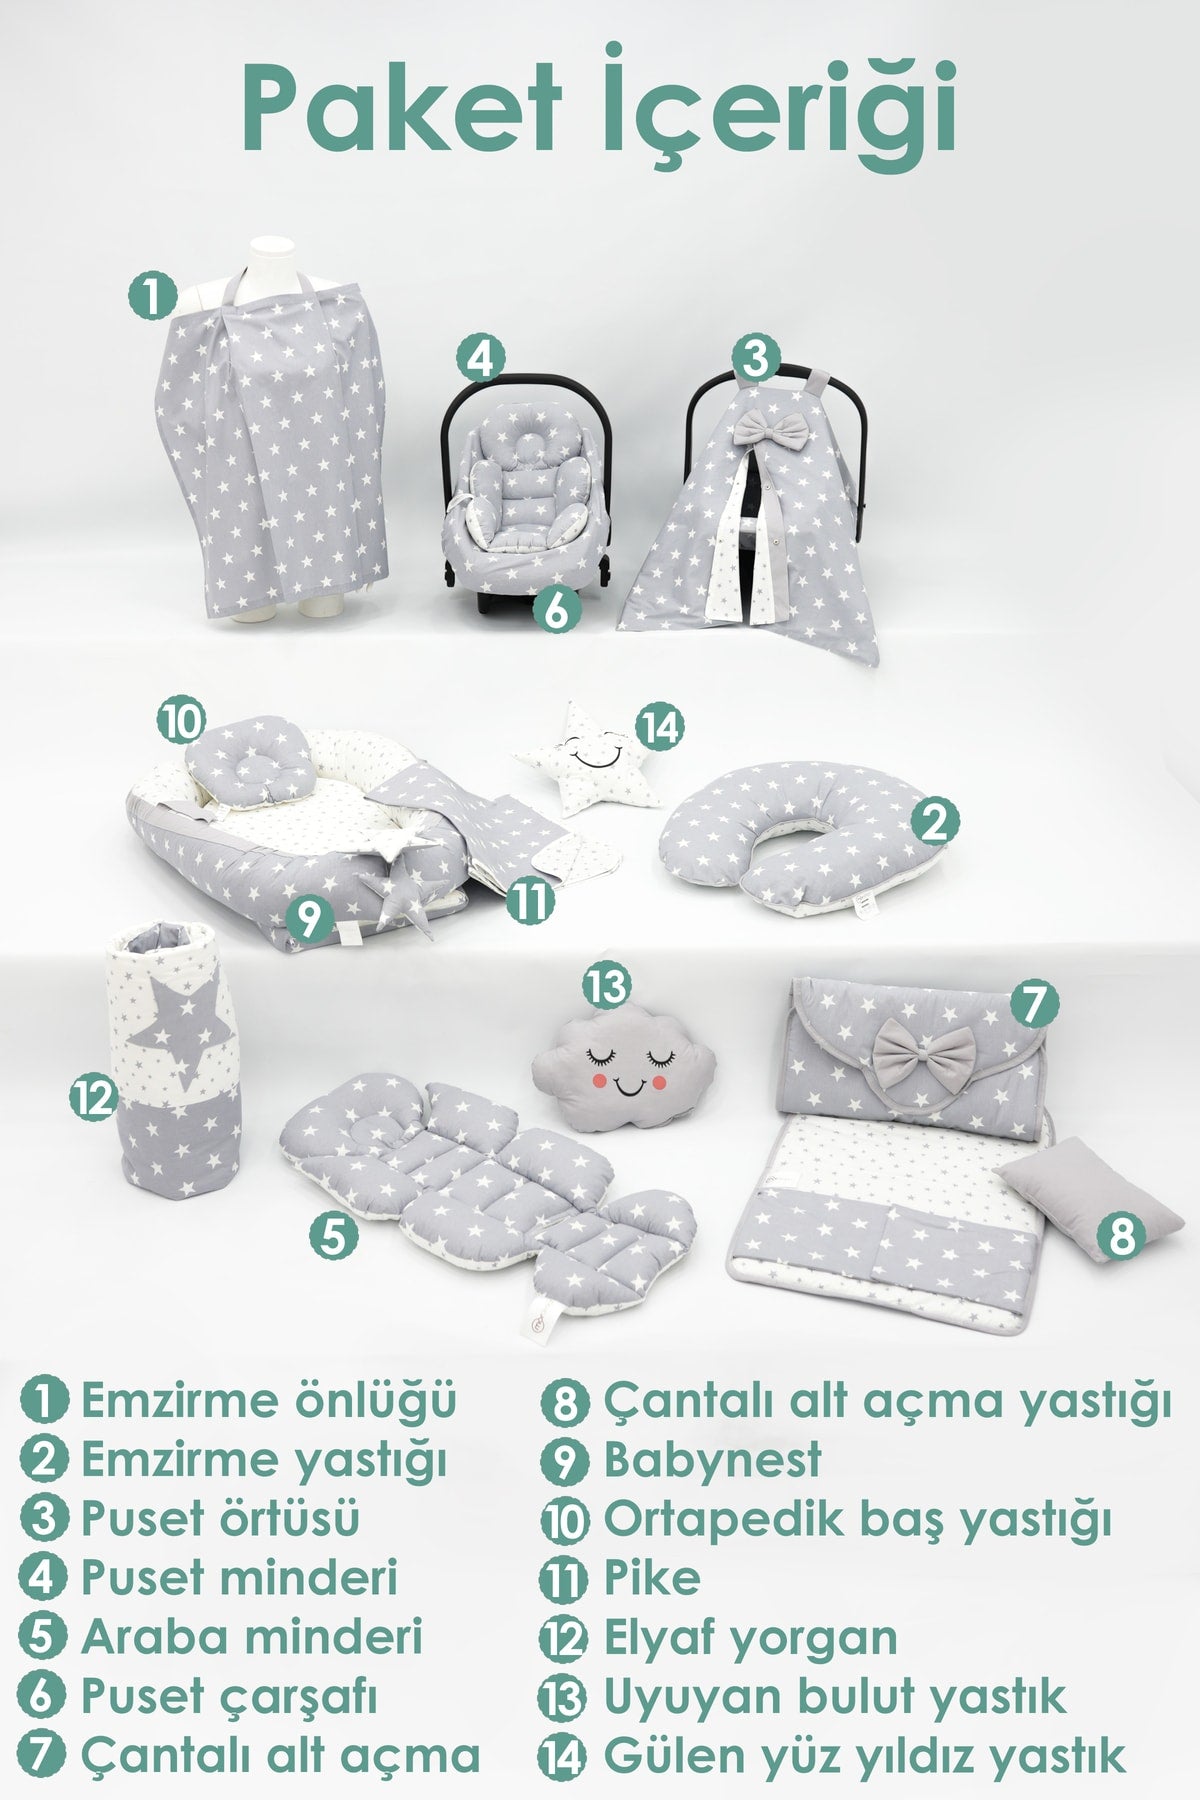 Babynest Mattress, Pillow, Pique, Orthopedic Car Cushion, Breastfeeding And Stroller Accessories Complete Set